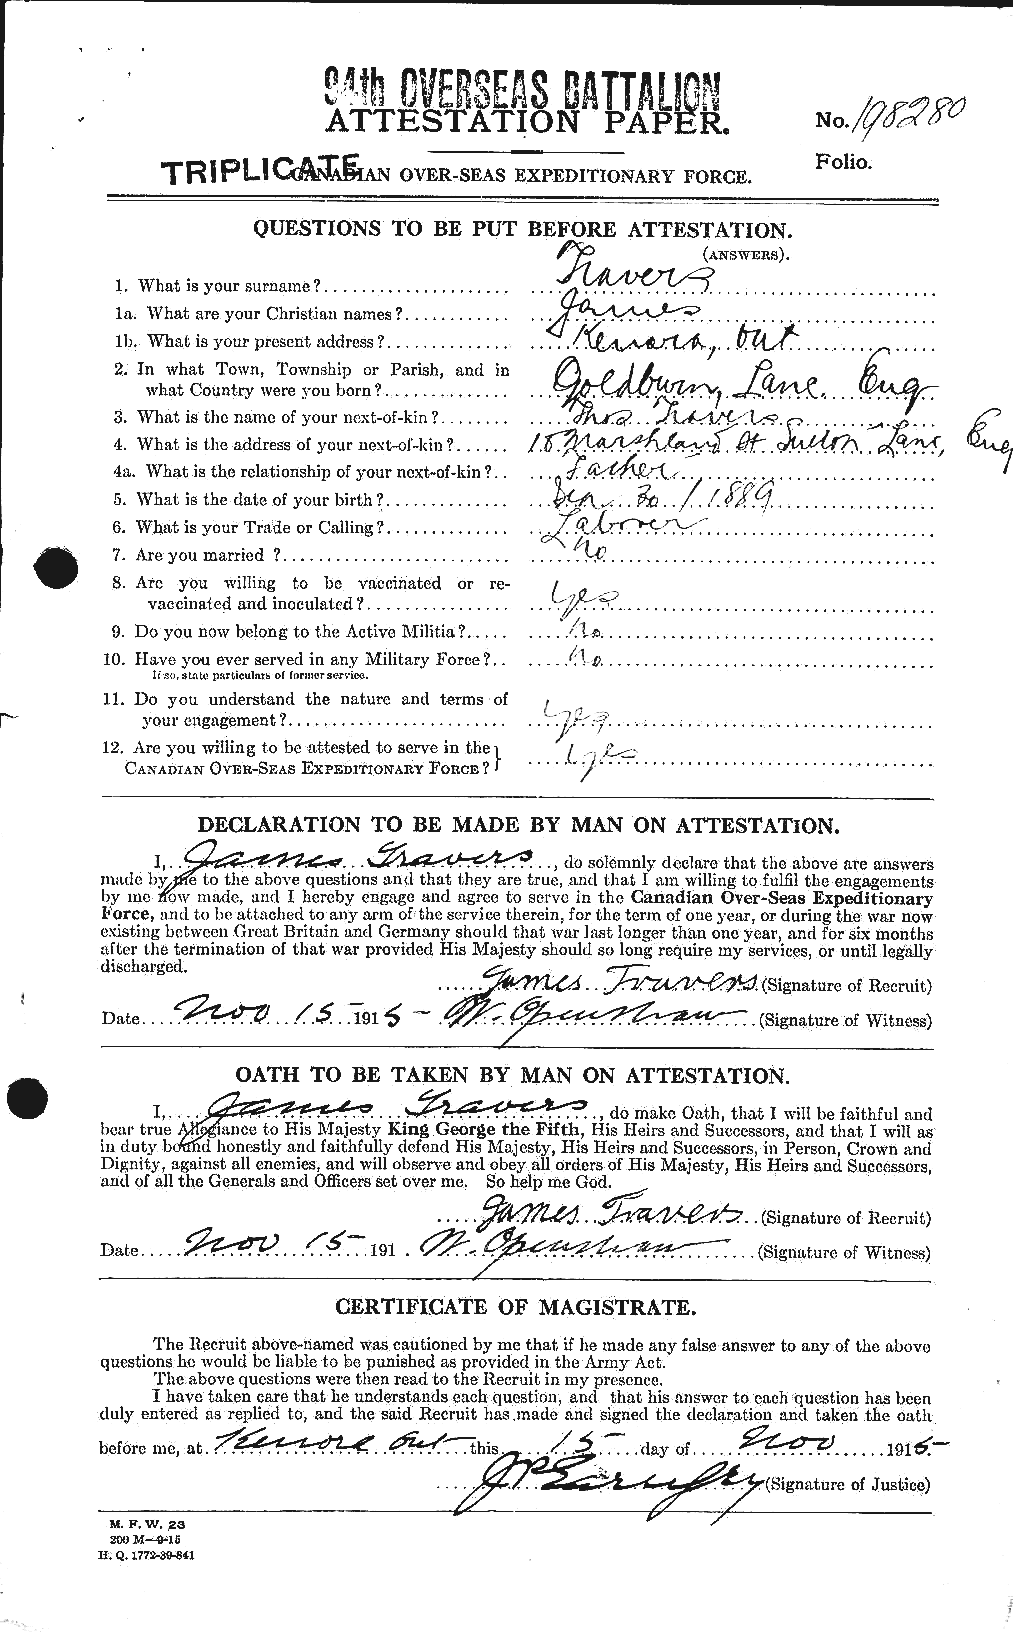 Personnel Records of the First World War - CEF 638708a